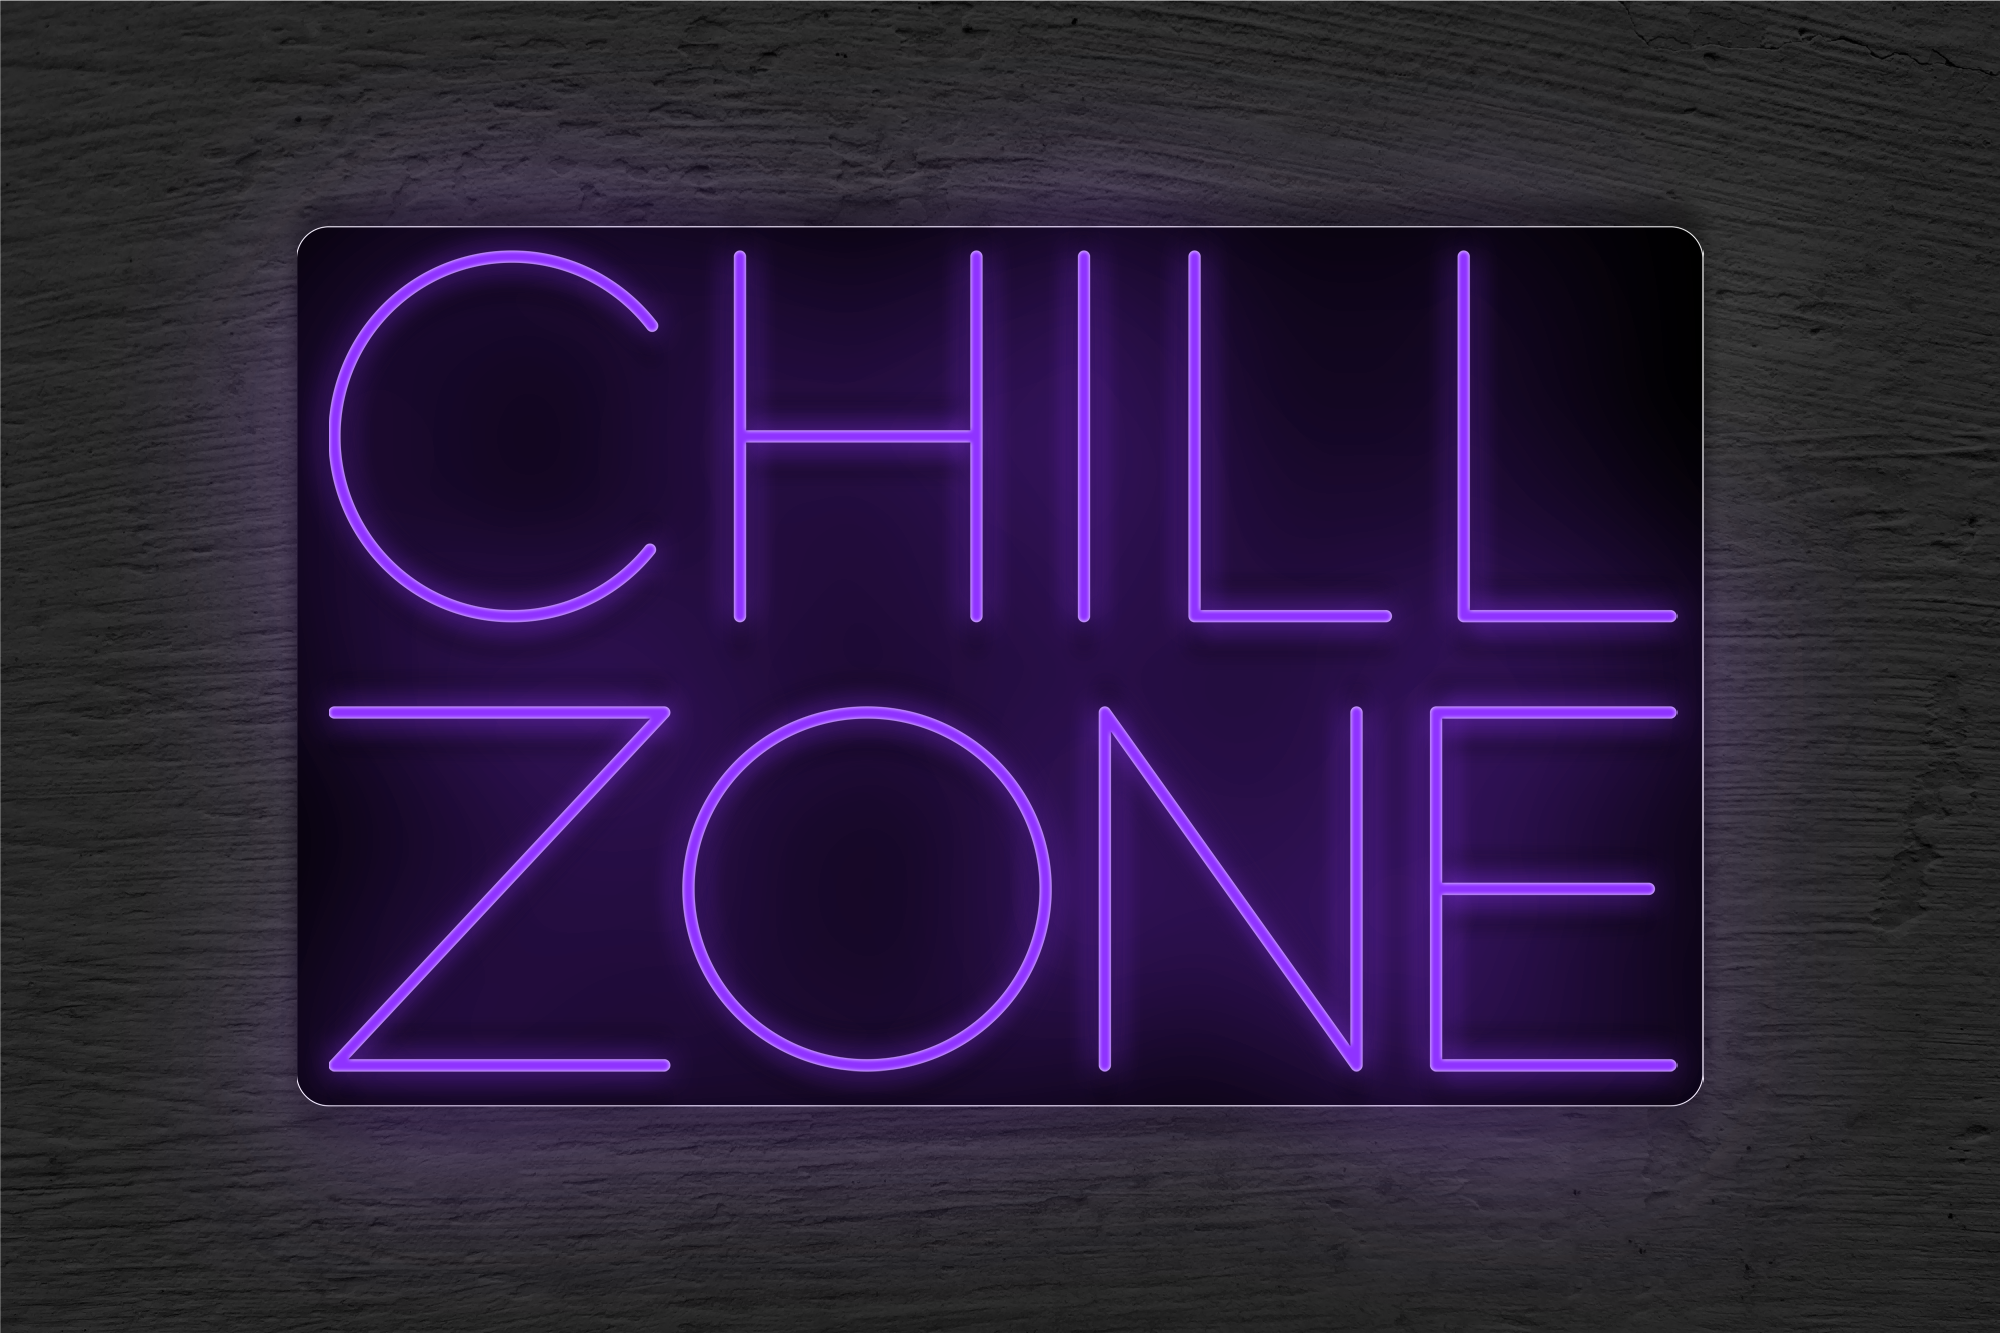 "CHILL ZONE" LED Neon Sign